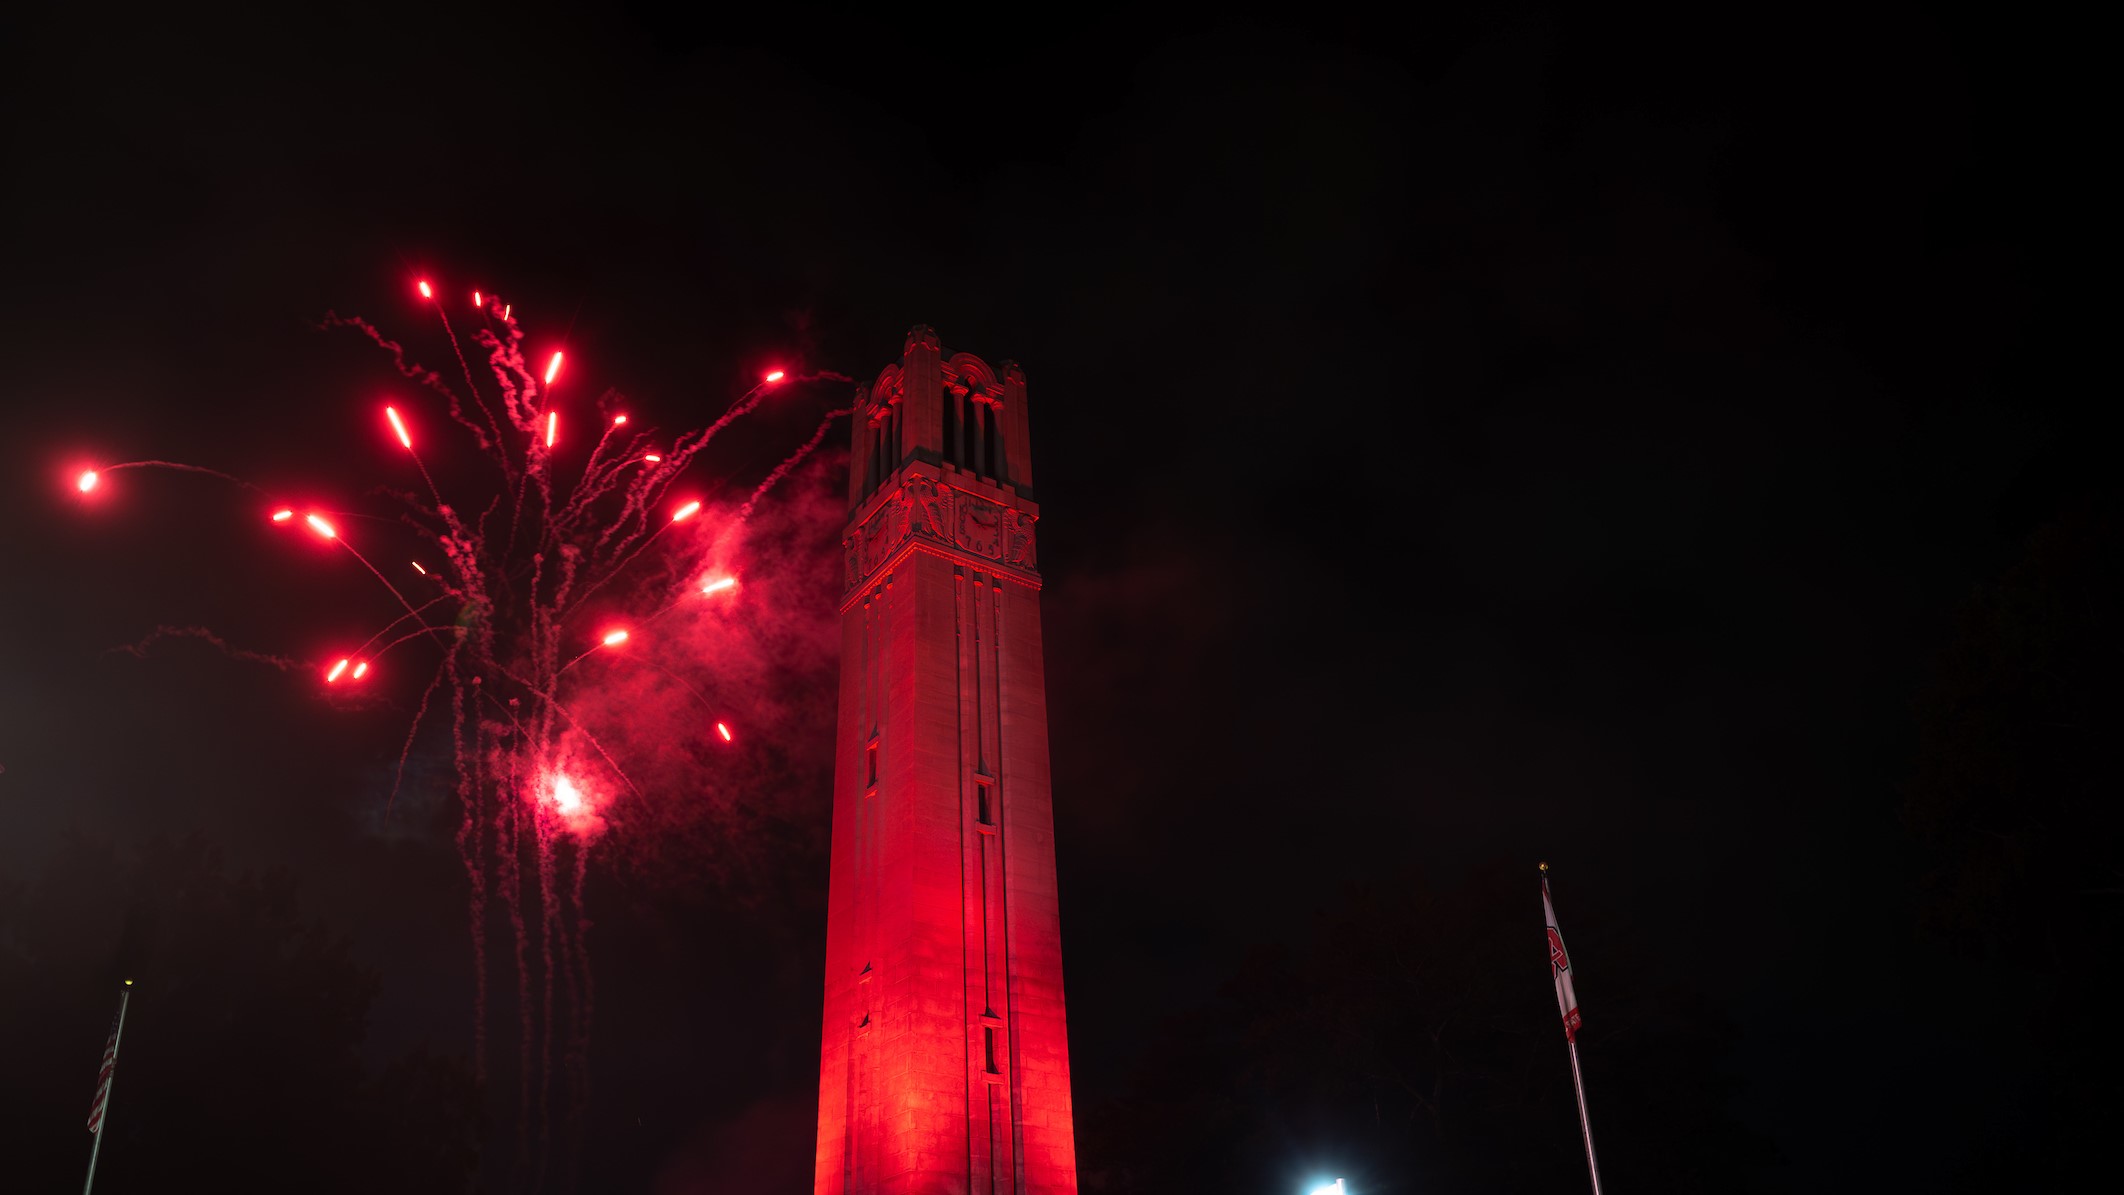 the belltower lit red with fireworks bursting above it